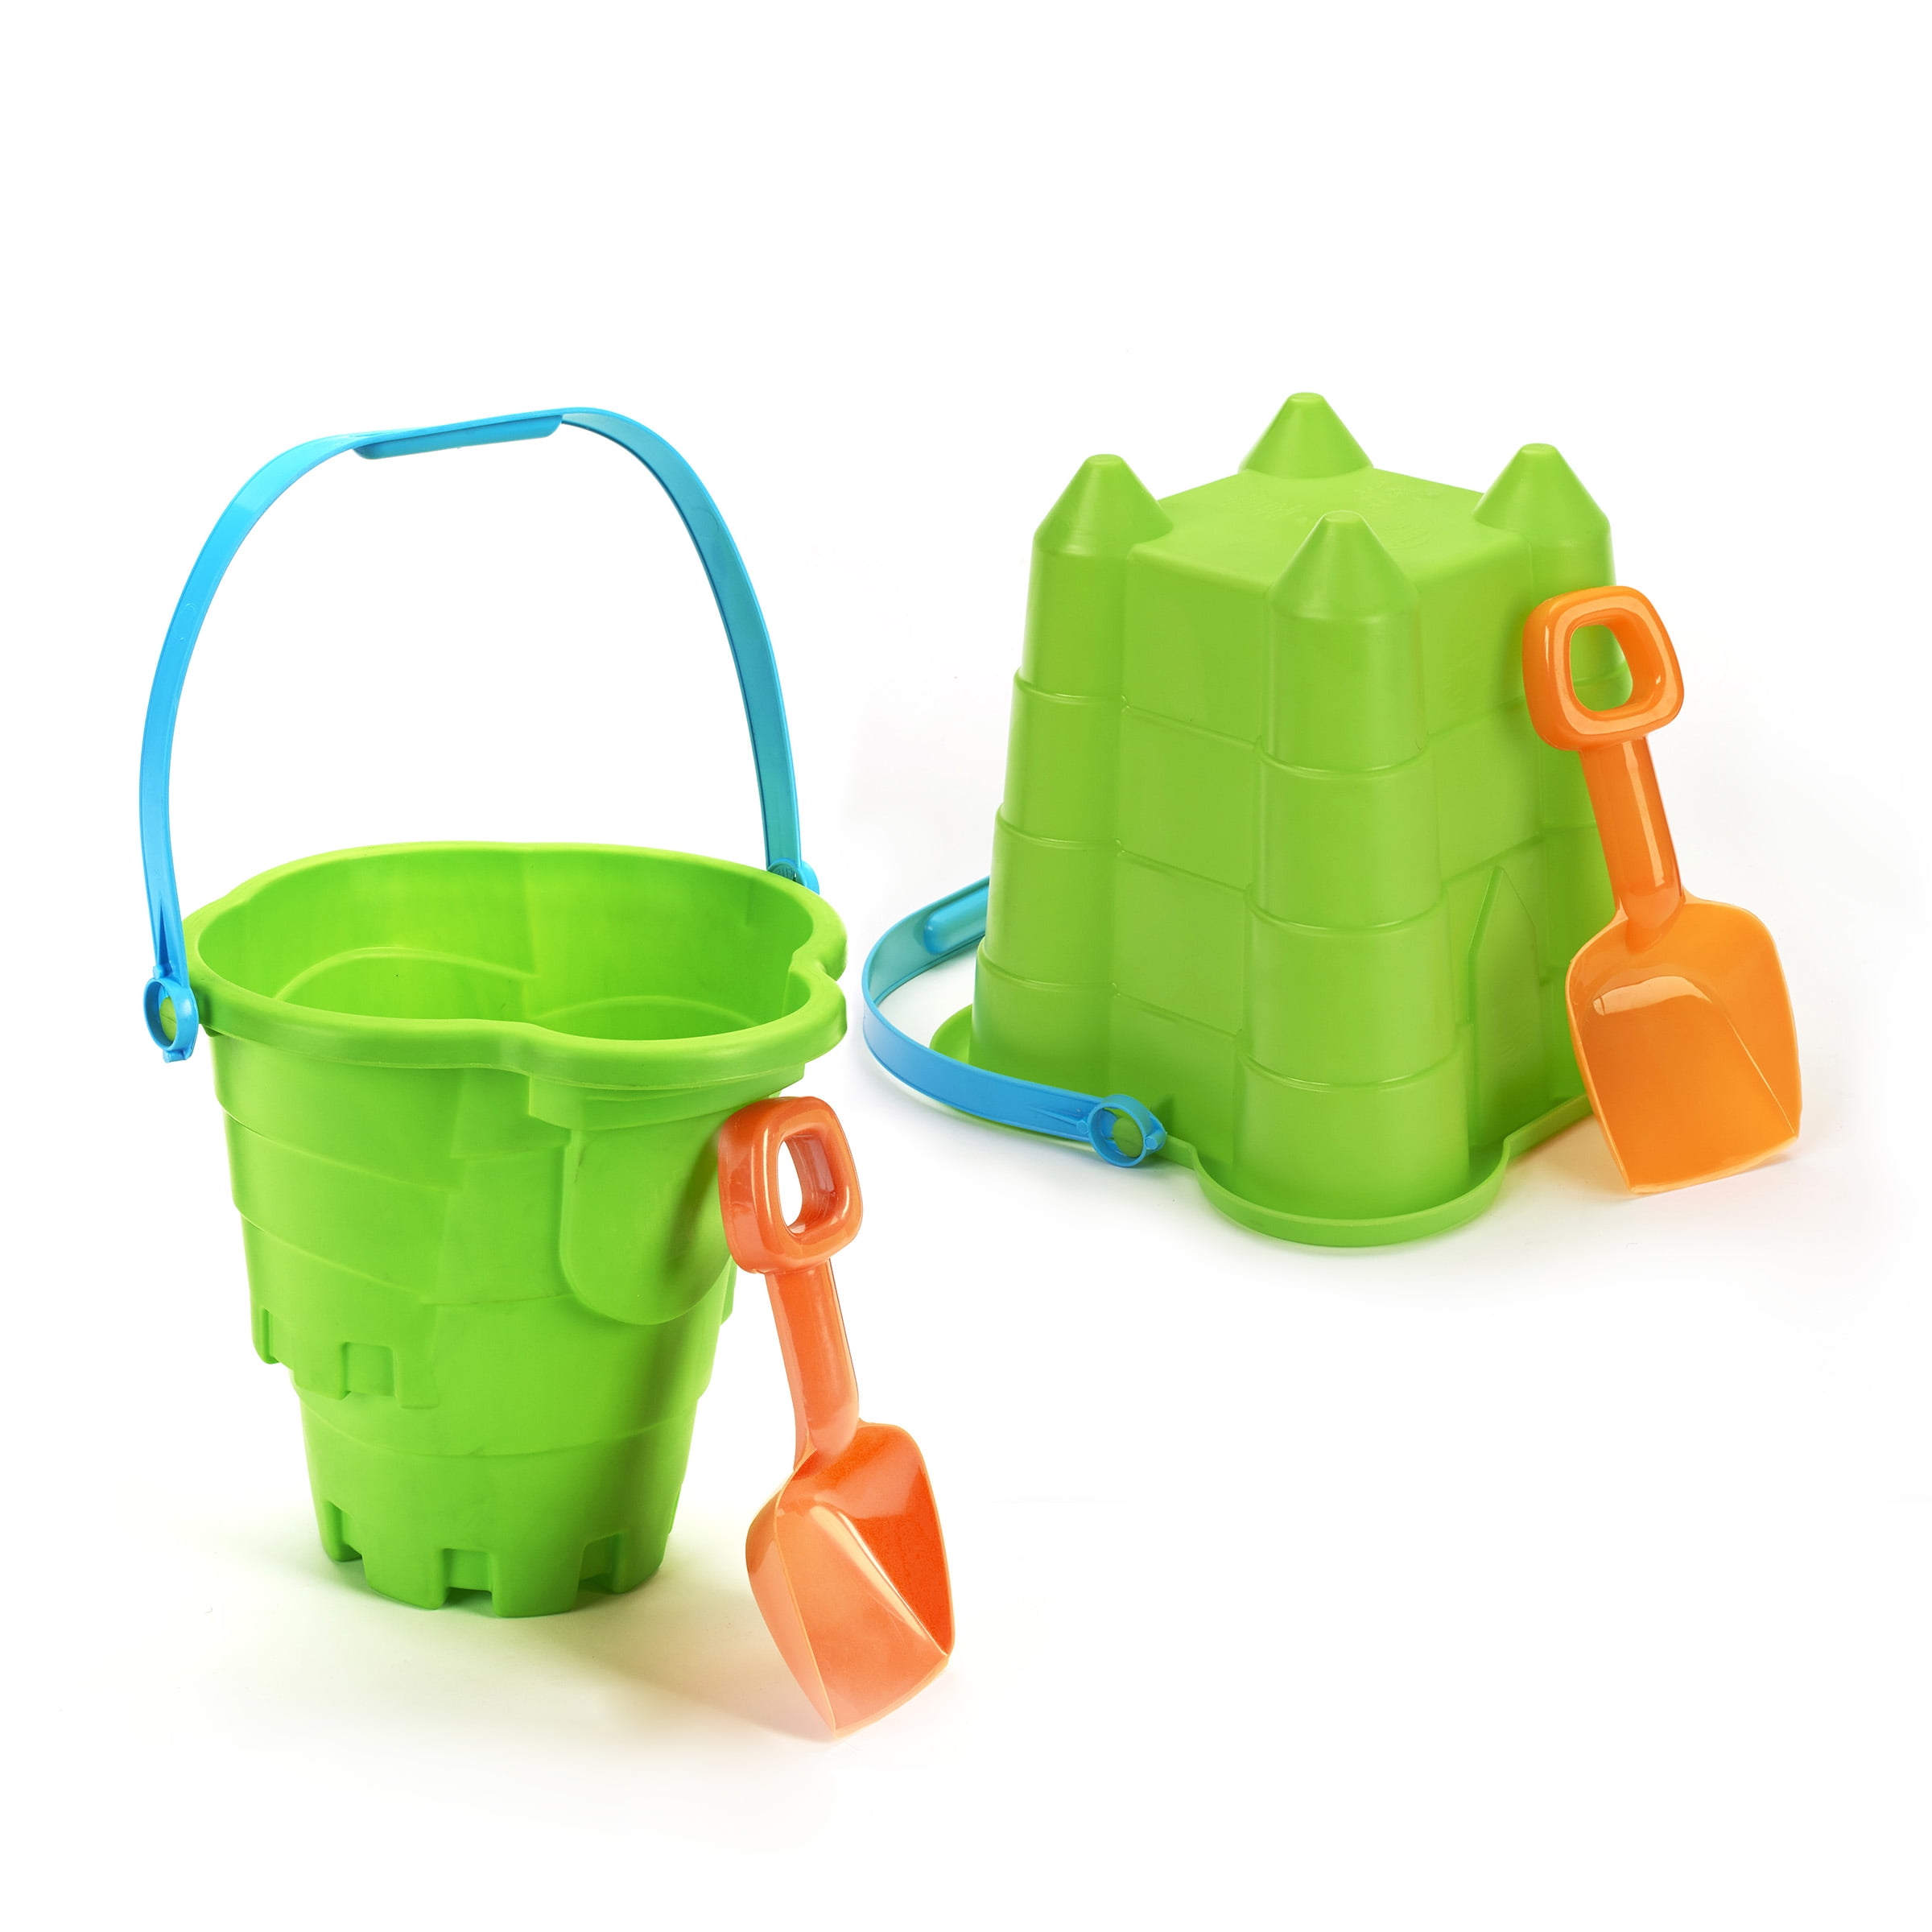 Set of 4 Beach Toys Sand Pit Toy Kids Beach Bucket Sand Mould 4 Designs/Colours 